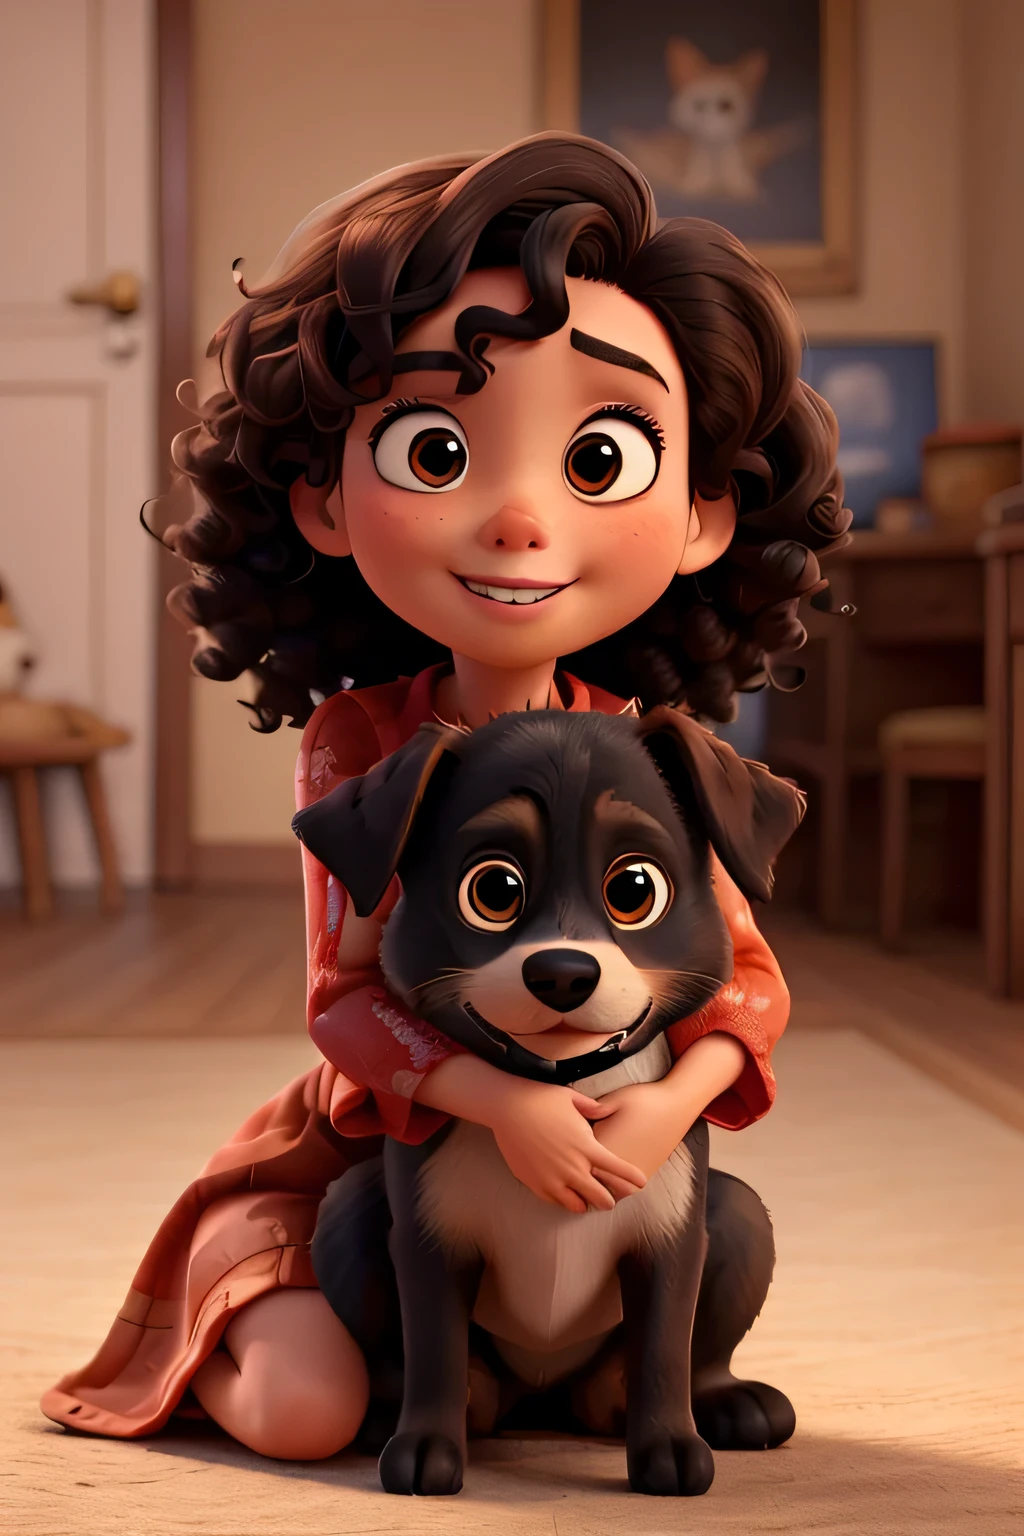 a . one with curly black hair, light brown skin, and dark brown eyes. She is dressed in a beautiful red dress and warmly hugging a dog. The scene must be in the distinctive Pixar digital art style.
